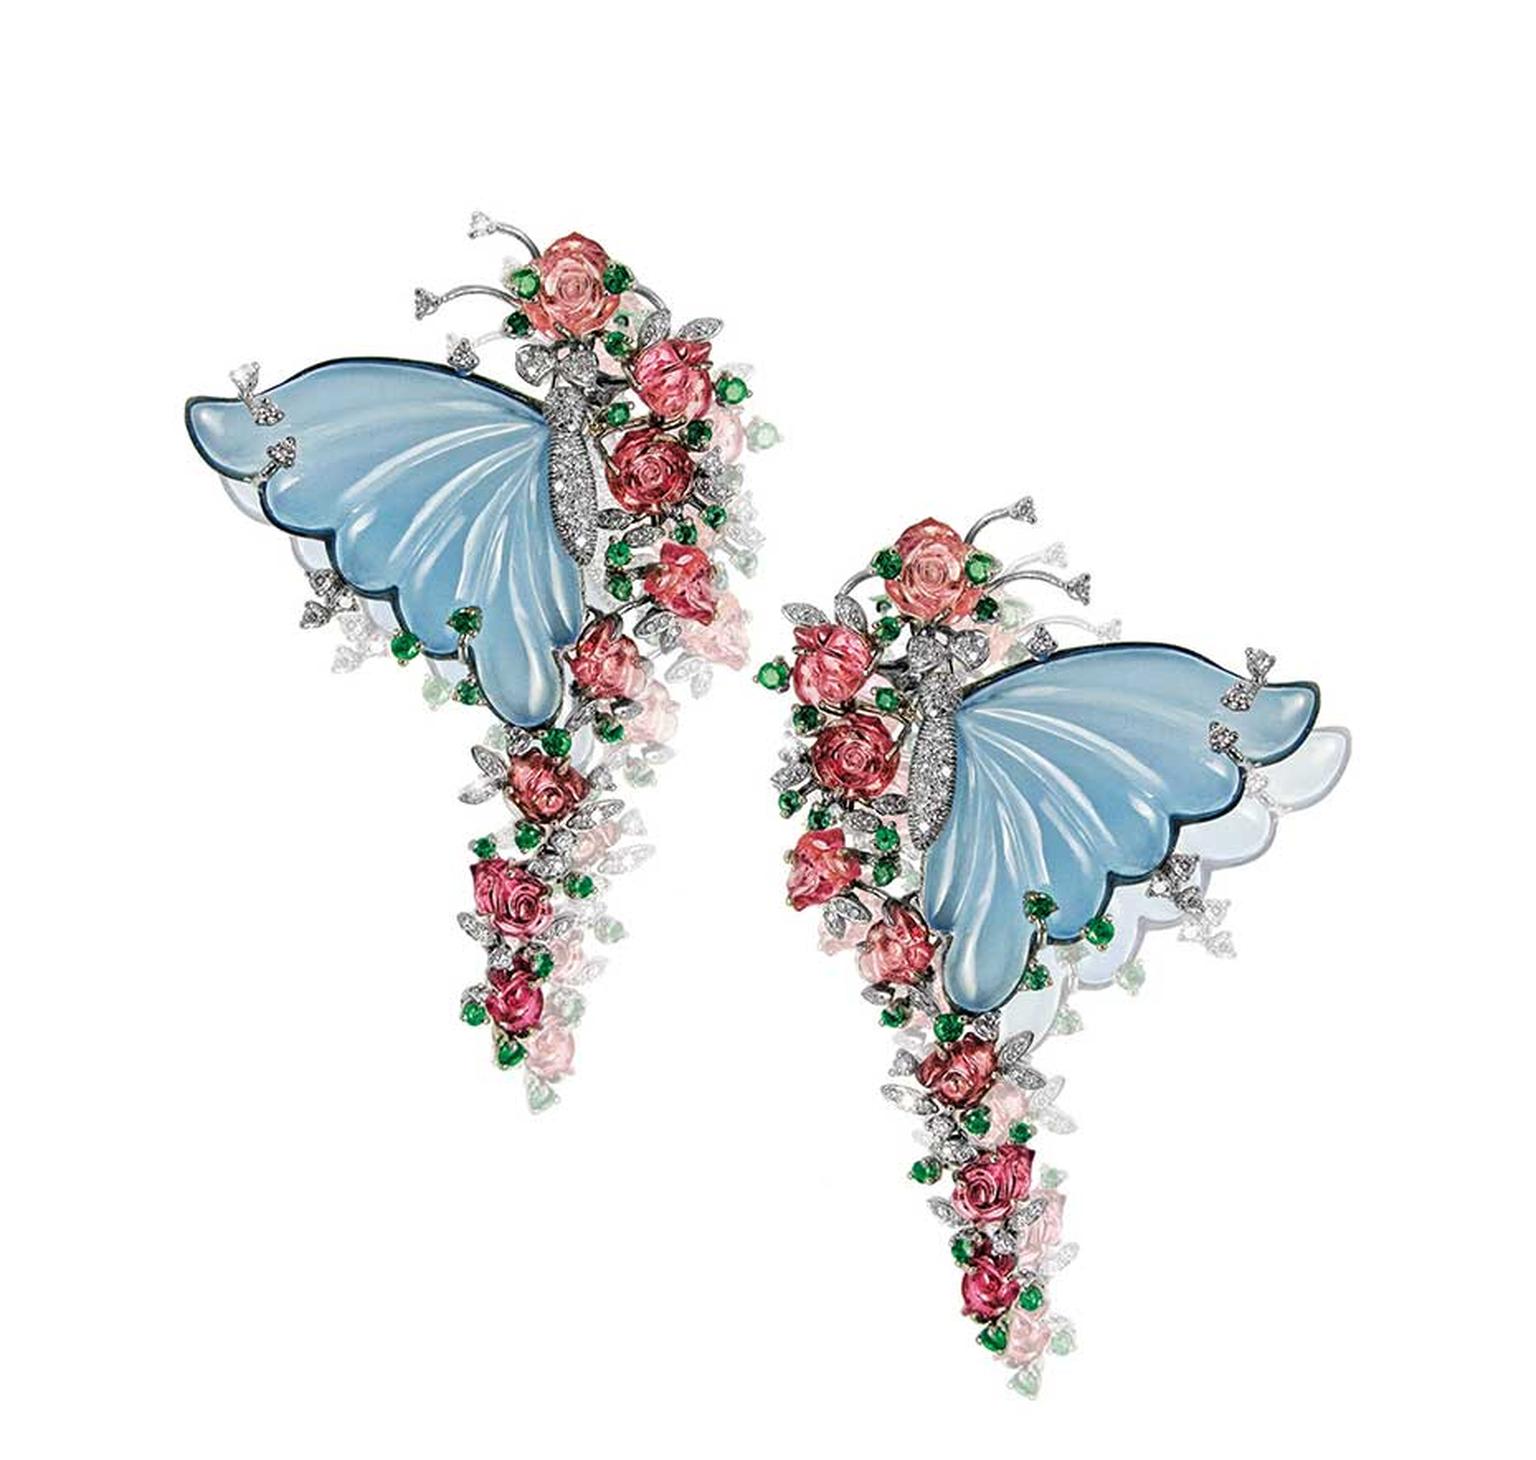 Butterfly earrings by Mirari with carved blue onyx wings, tourmaline flowers, emeralds and diamonds.